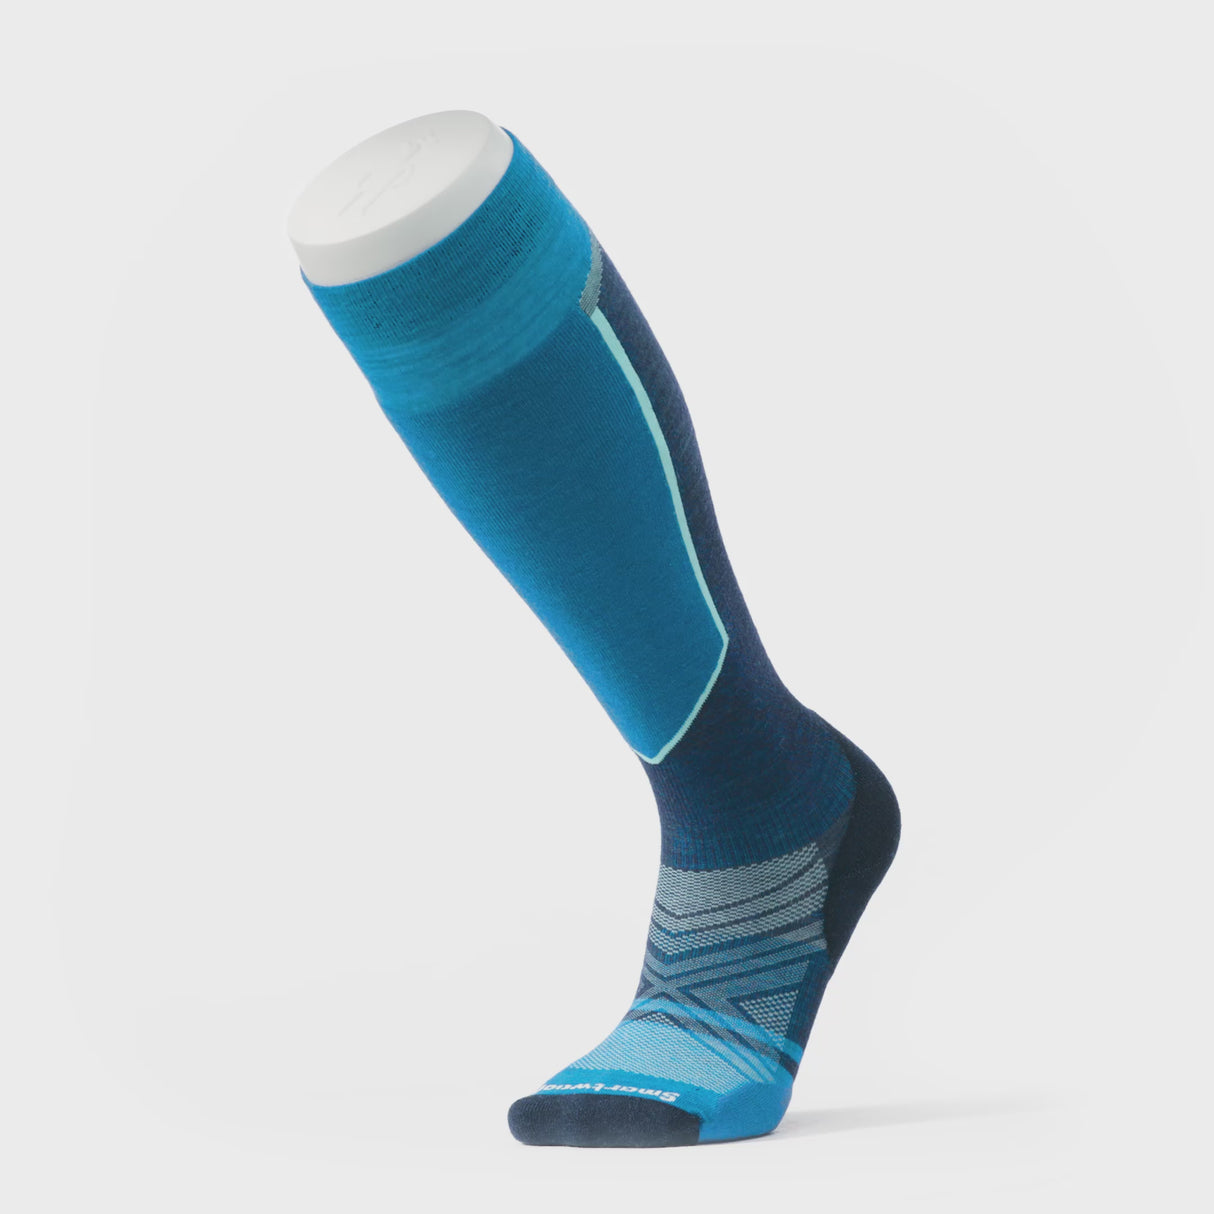 Smartwool Ski Targeted Cushion Extra Stretch Over-the-Calf Socks